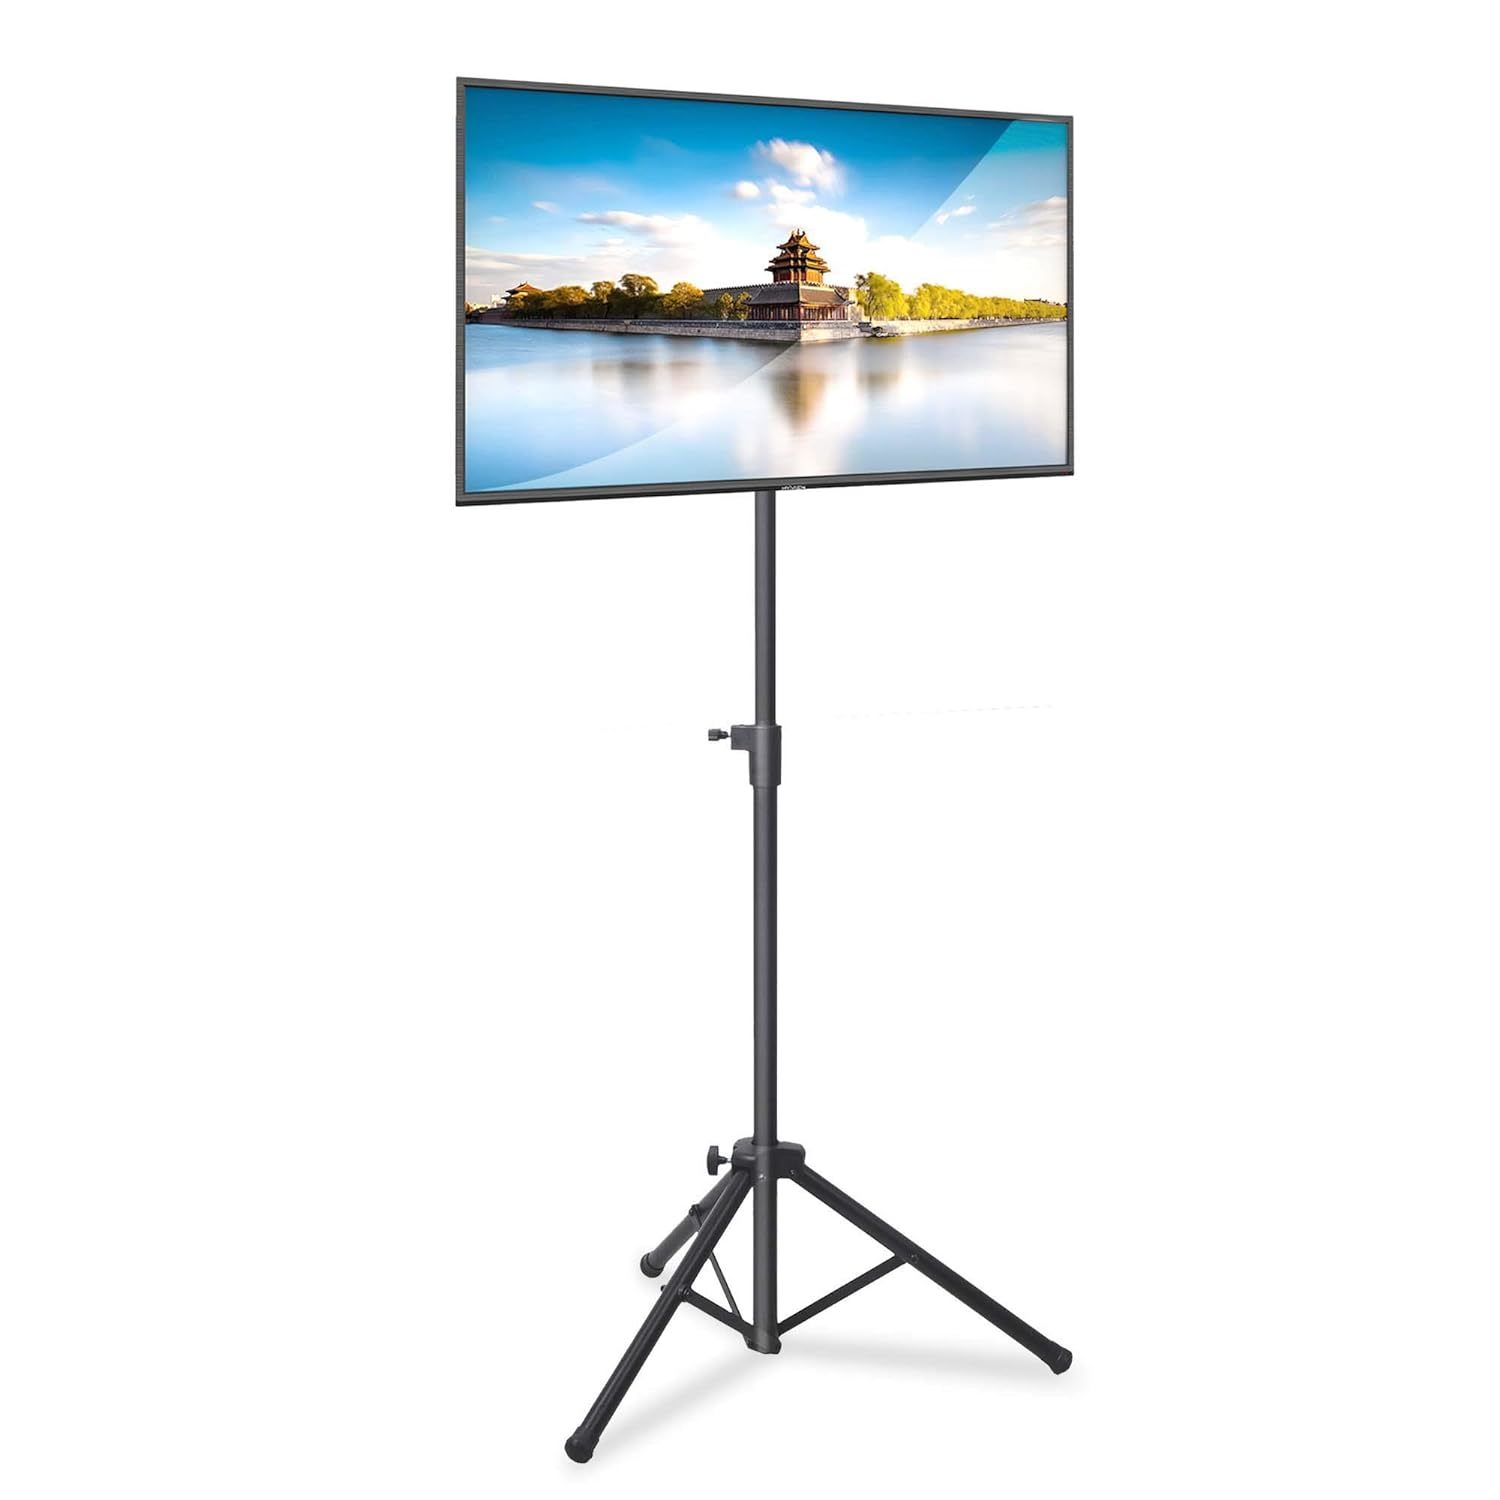 Pyle Premium LCD Flat Panel TV Tripod, Portable TV Stand, Foldable Stand Mount,  - $67.99